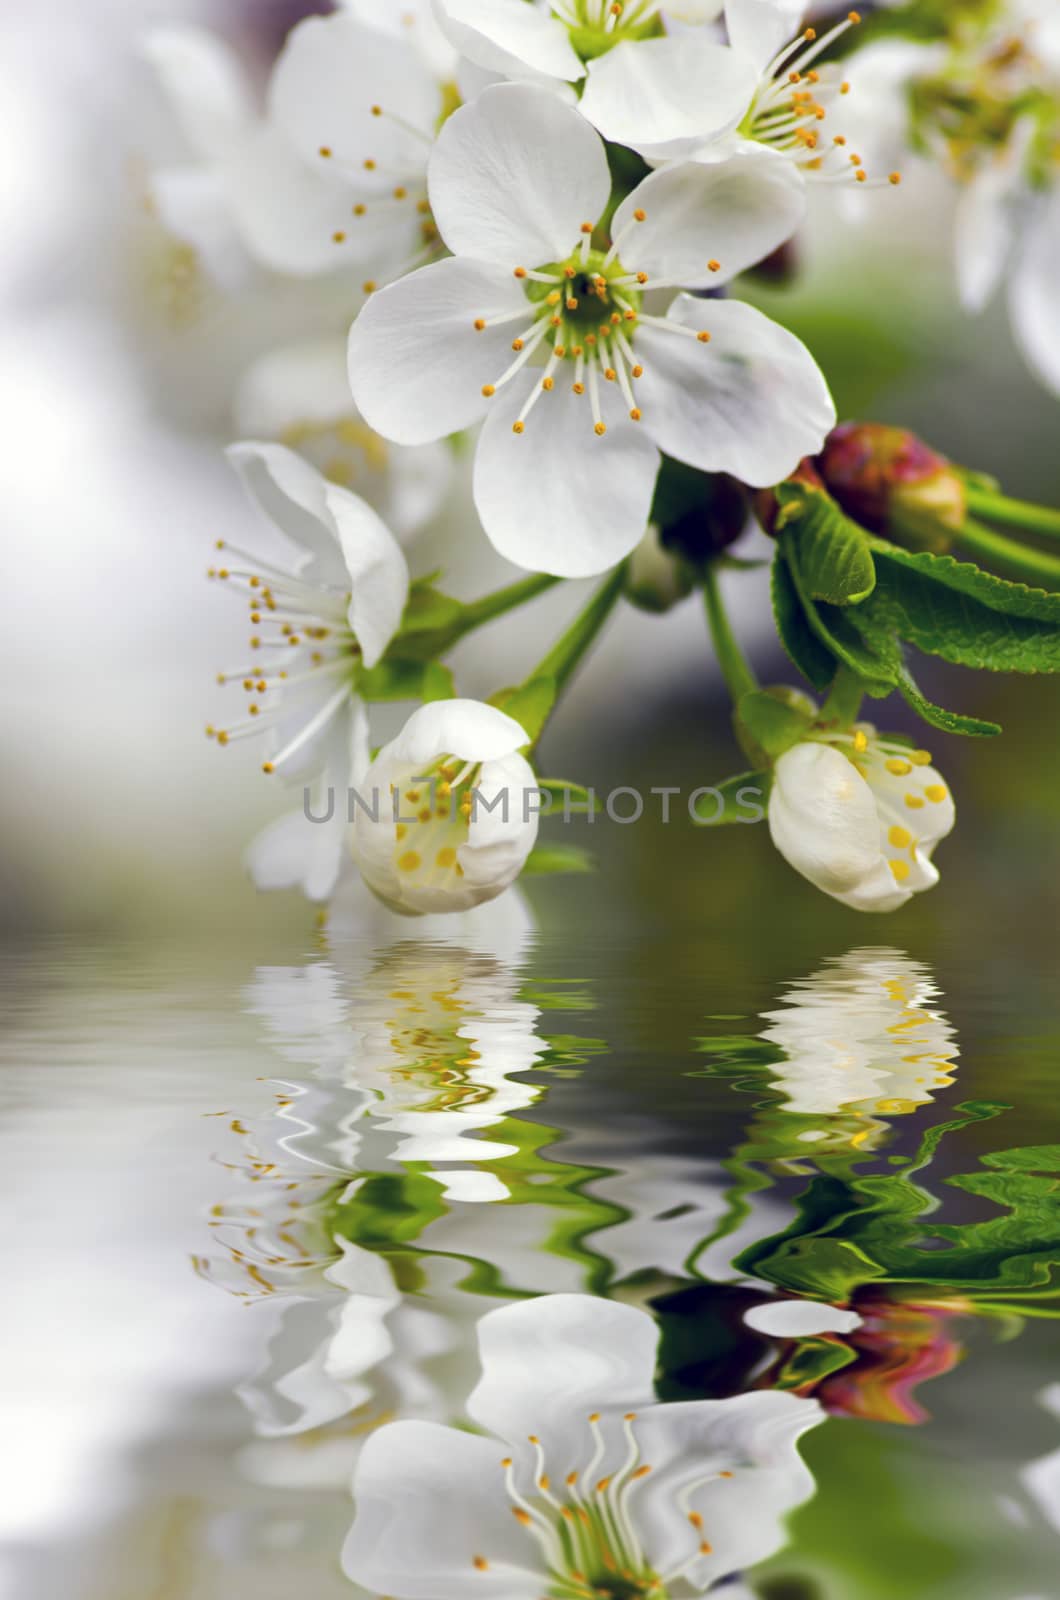 Cherry blossom closeup over natural background by dolnikow